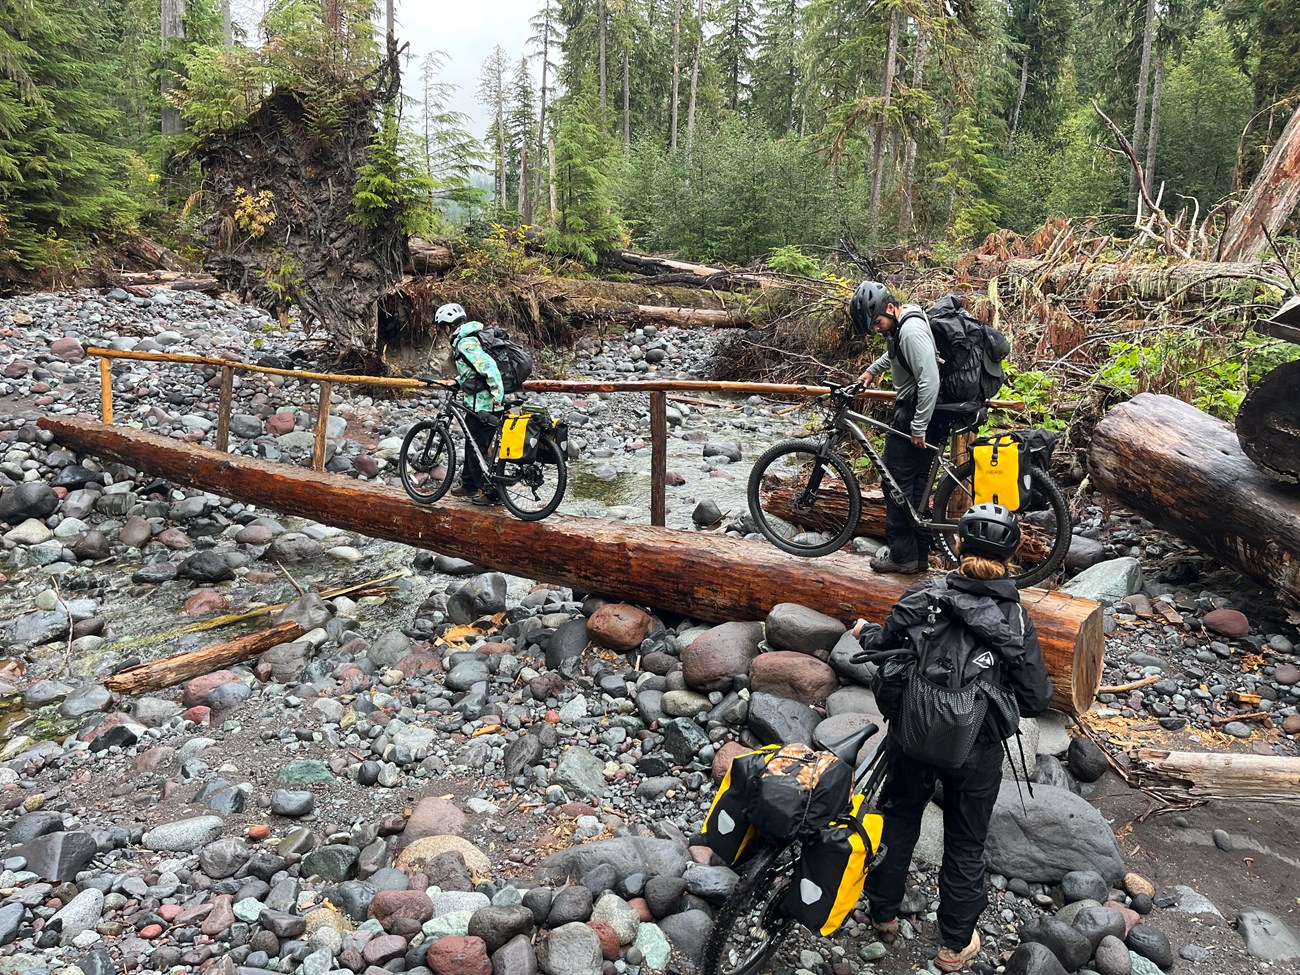 Three people wearing helmets wheel mountain bikes over a narrow log bridge crossing a rocky wash in the forest.